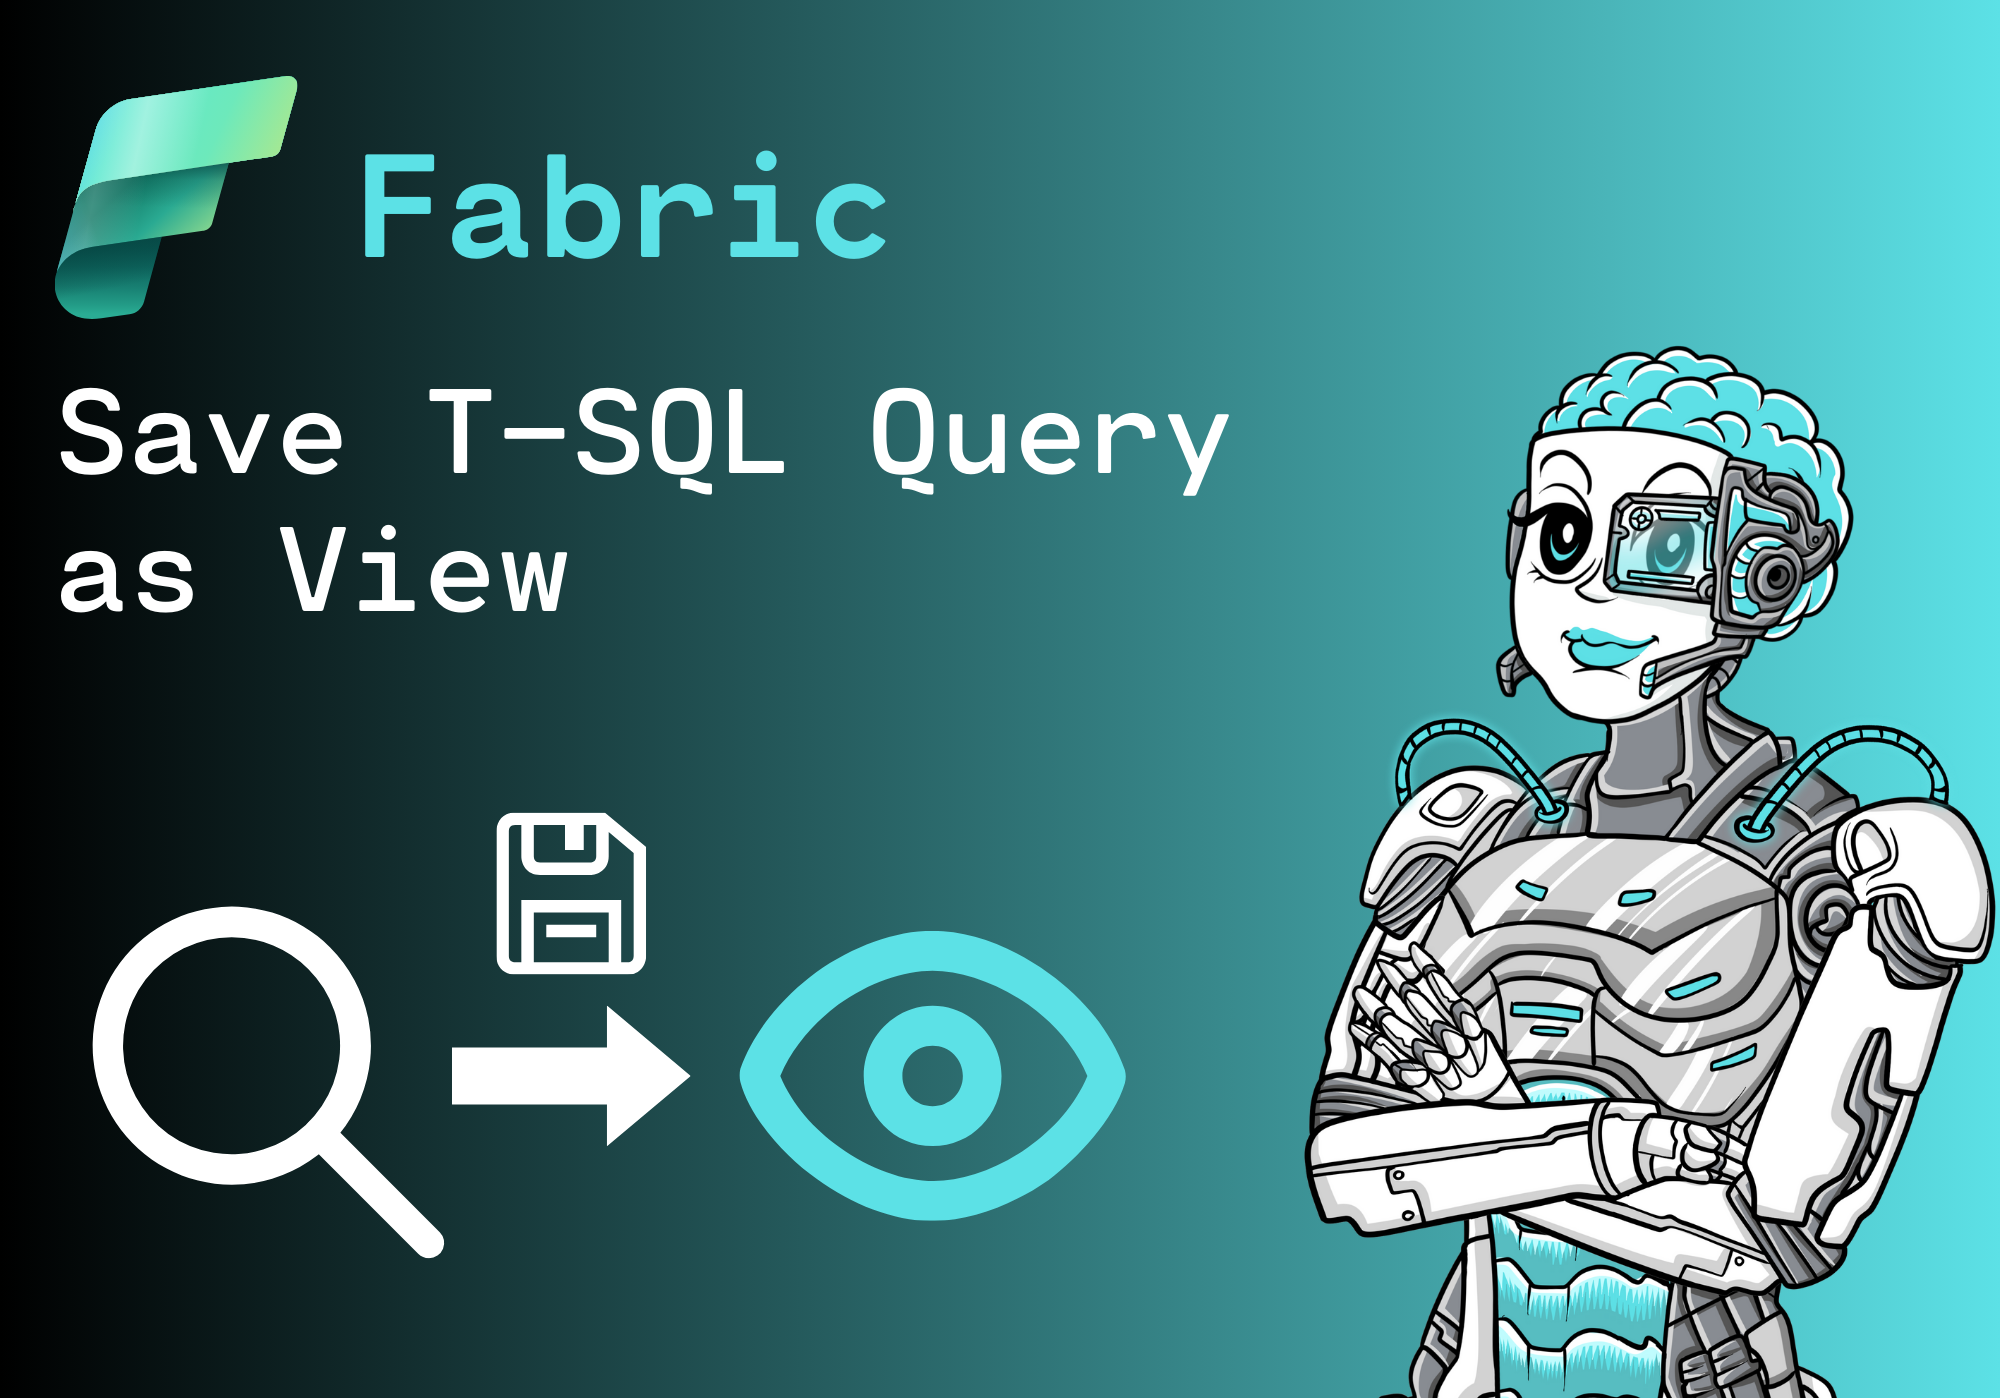 How to save a T-SQL Query as View in Microsoft Fabric